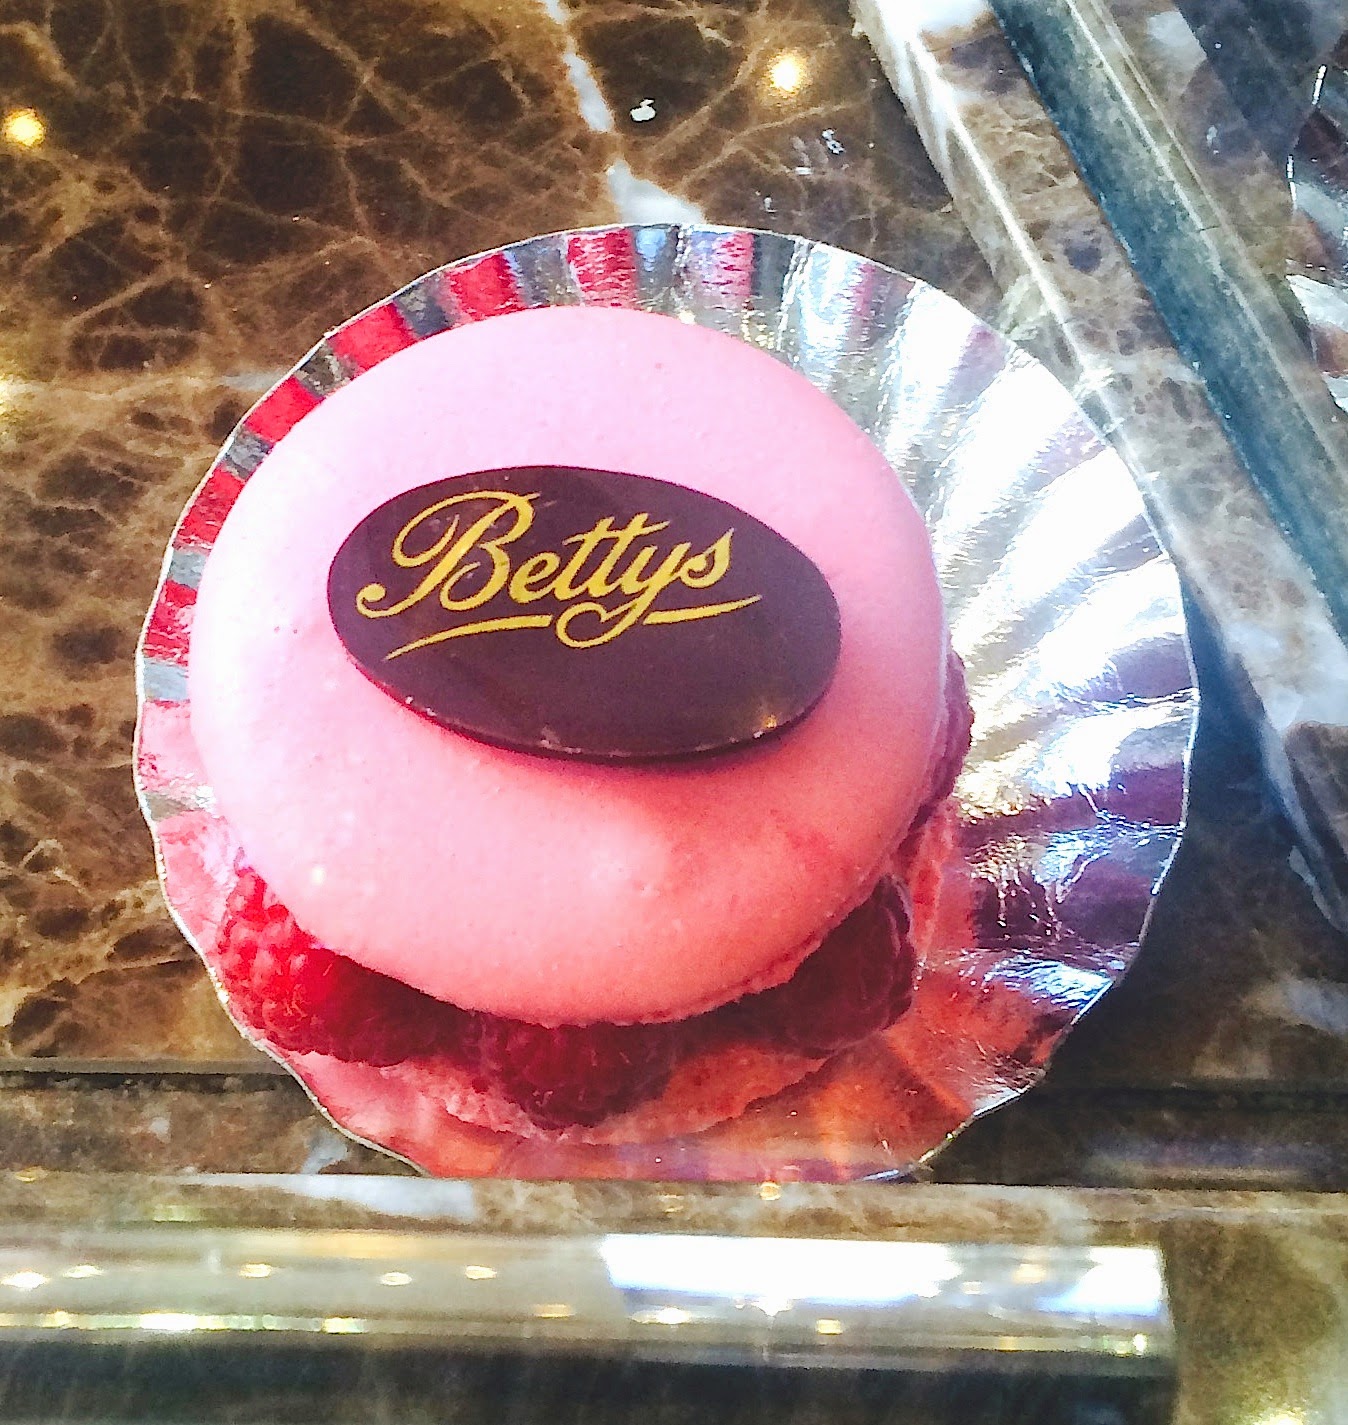 bettys afternoon tea macaron the betty stamp